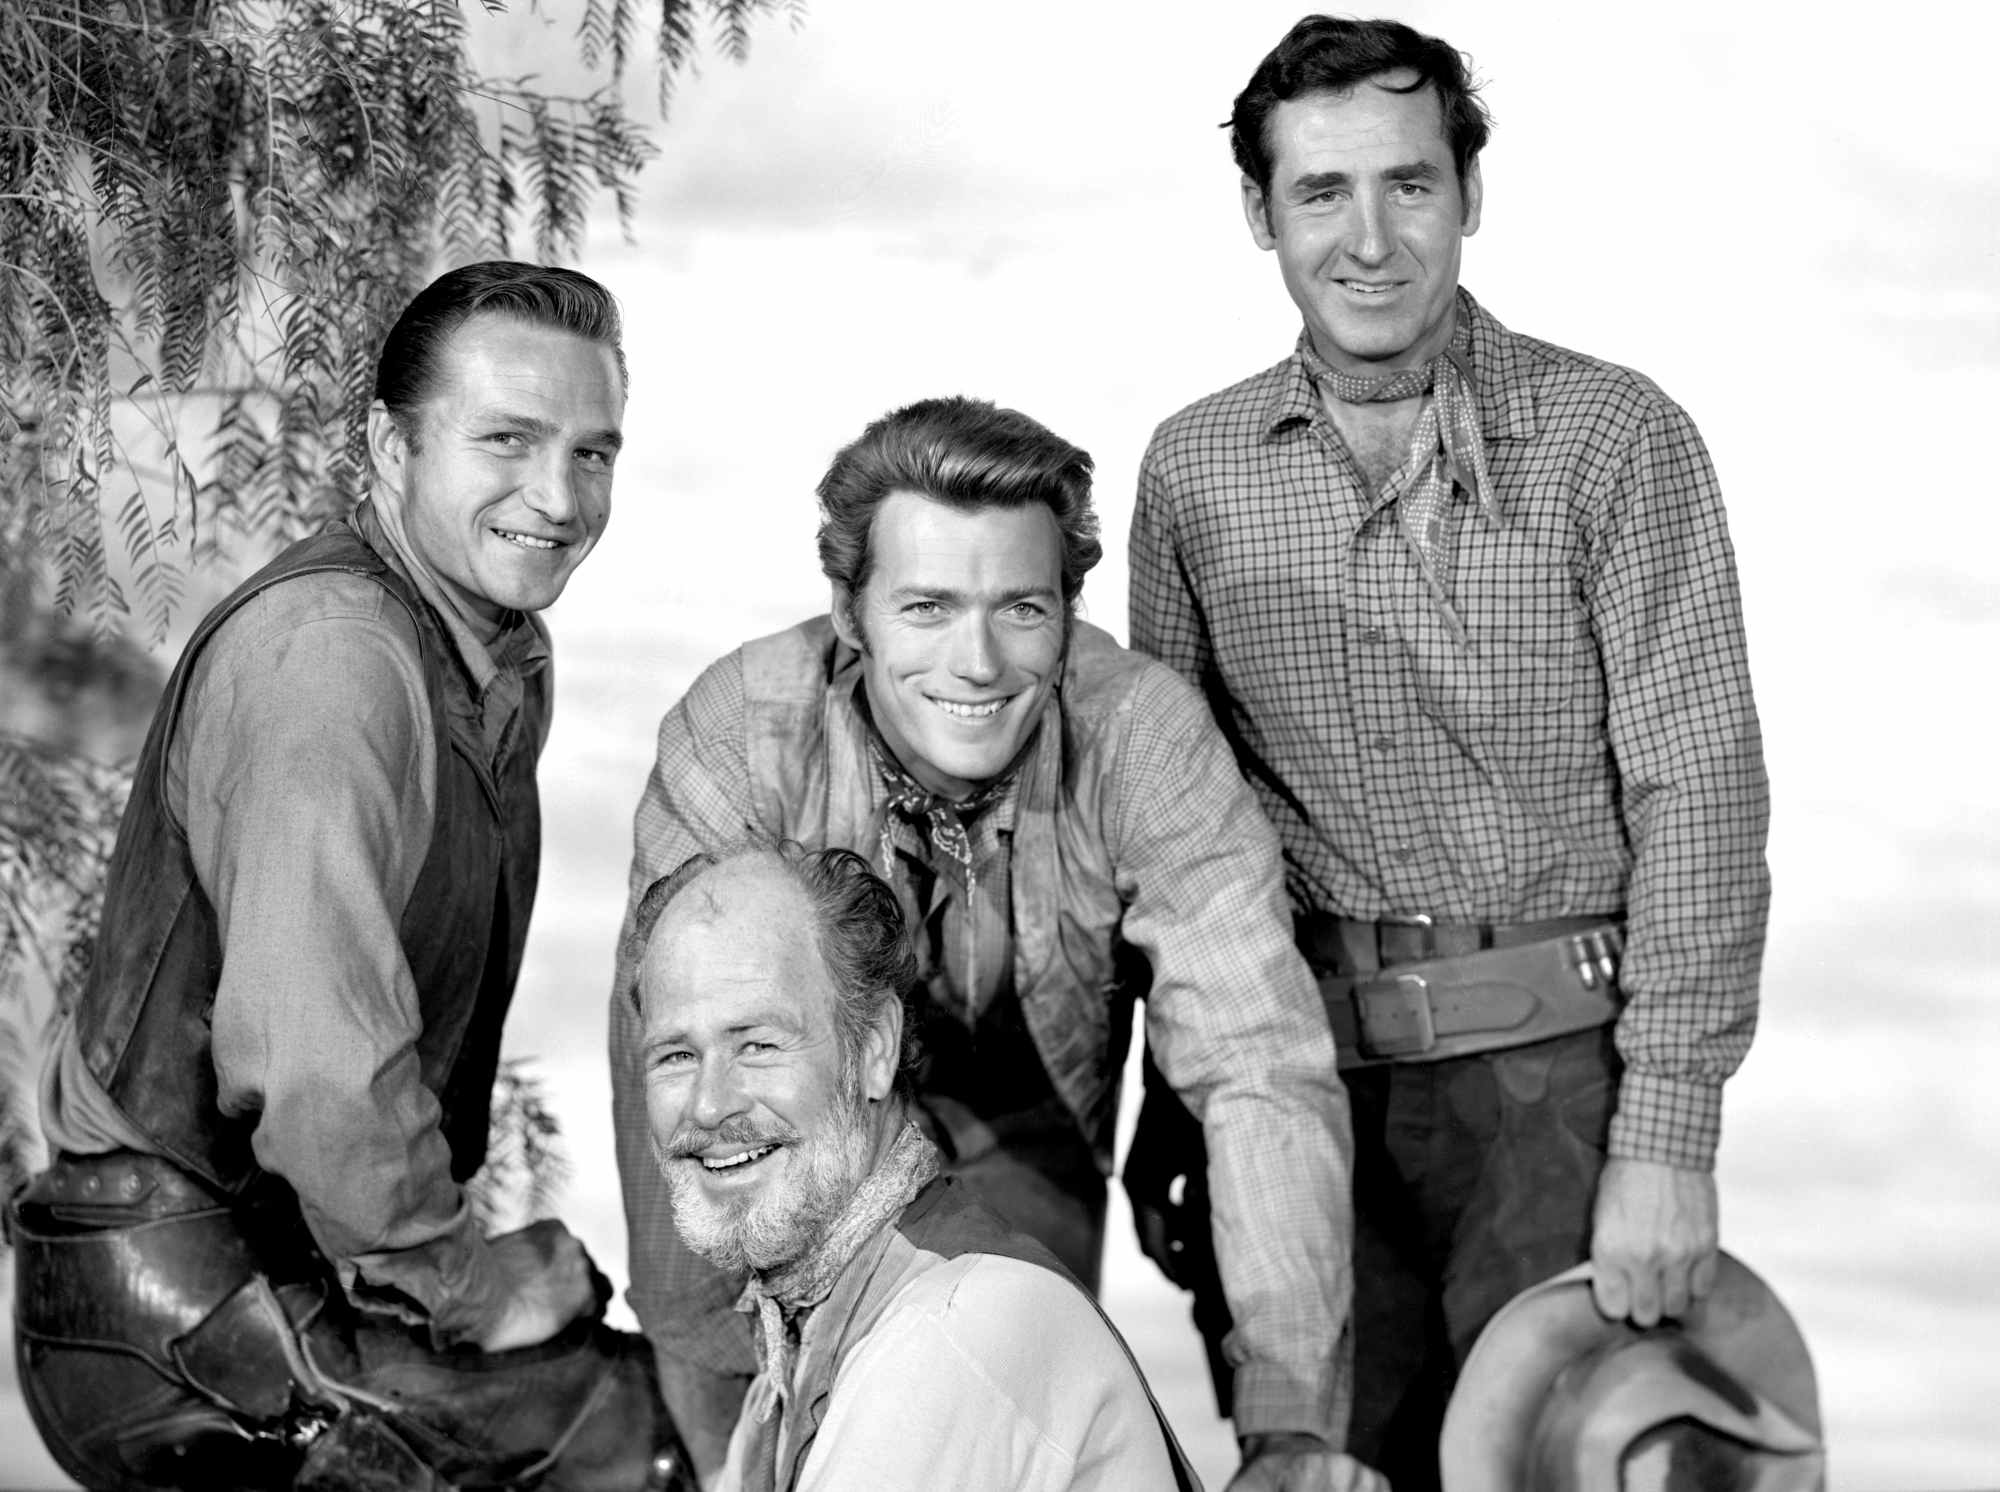 'Rawhide' Eric Fleming as Gil Favor, Paul Brinegar as Wishbone, Clint Eastwood as Rowdy Yates, and Sheb Wooley as Pete Nolan wearing Western costumes, smiling for a promo image.